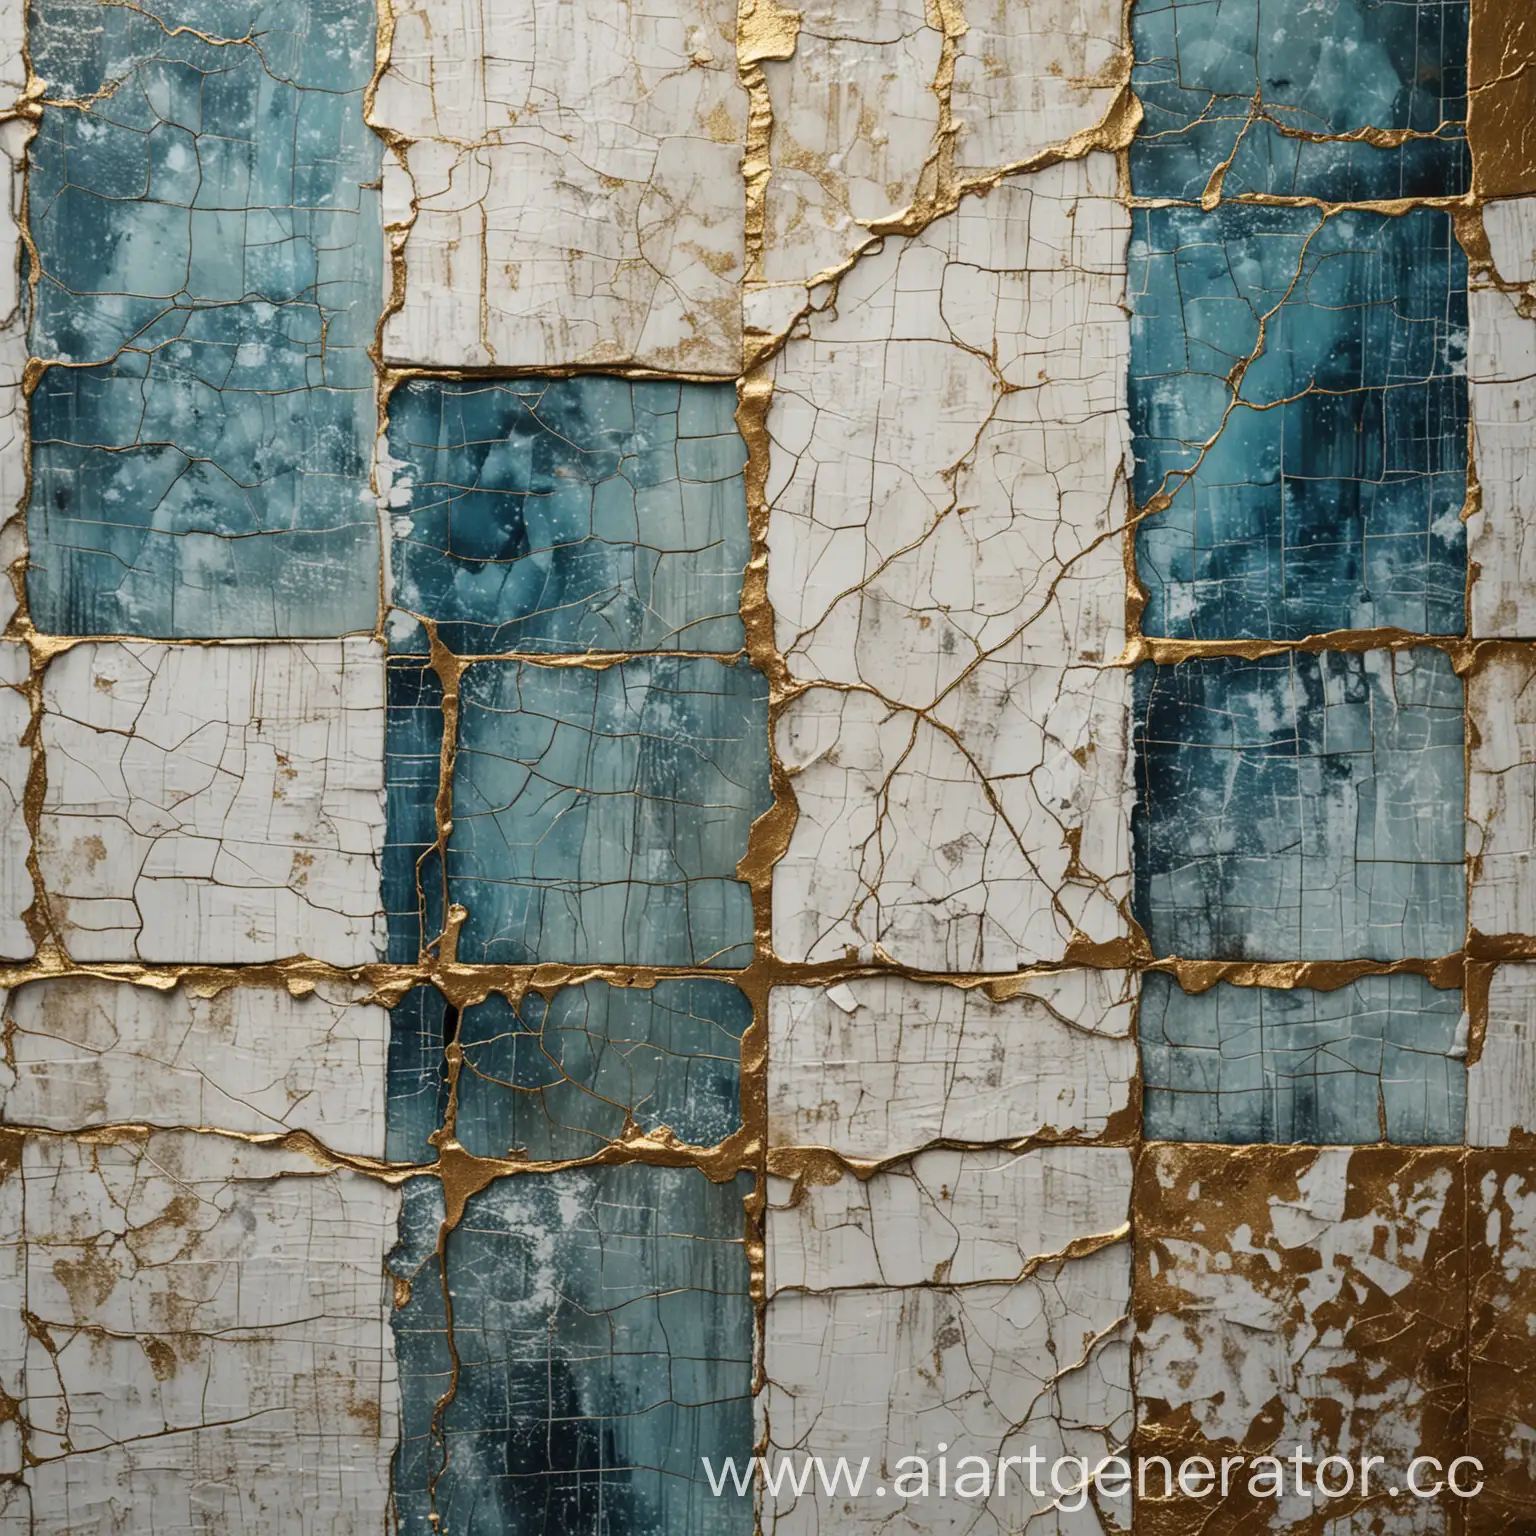 Abstract-Crackle-Collage-Painting-with-Blue-and-White-Expressive-Gold-Accents